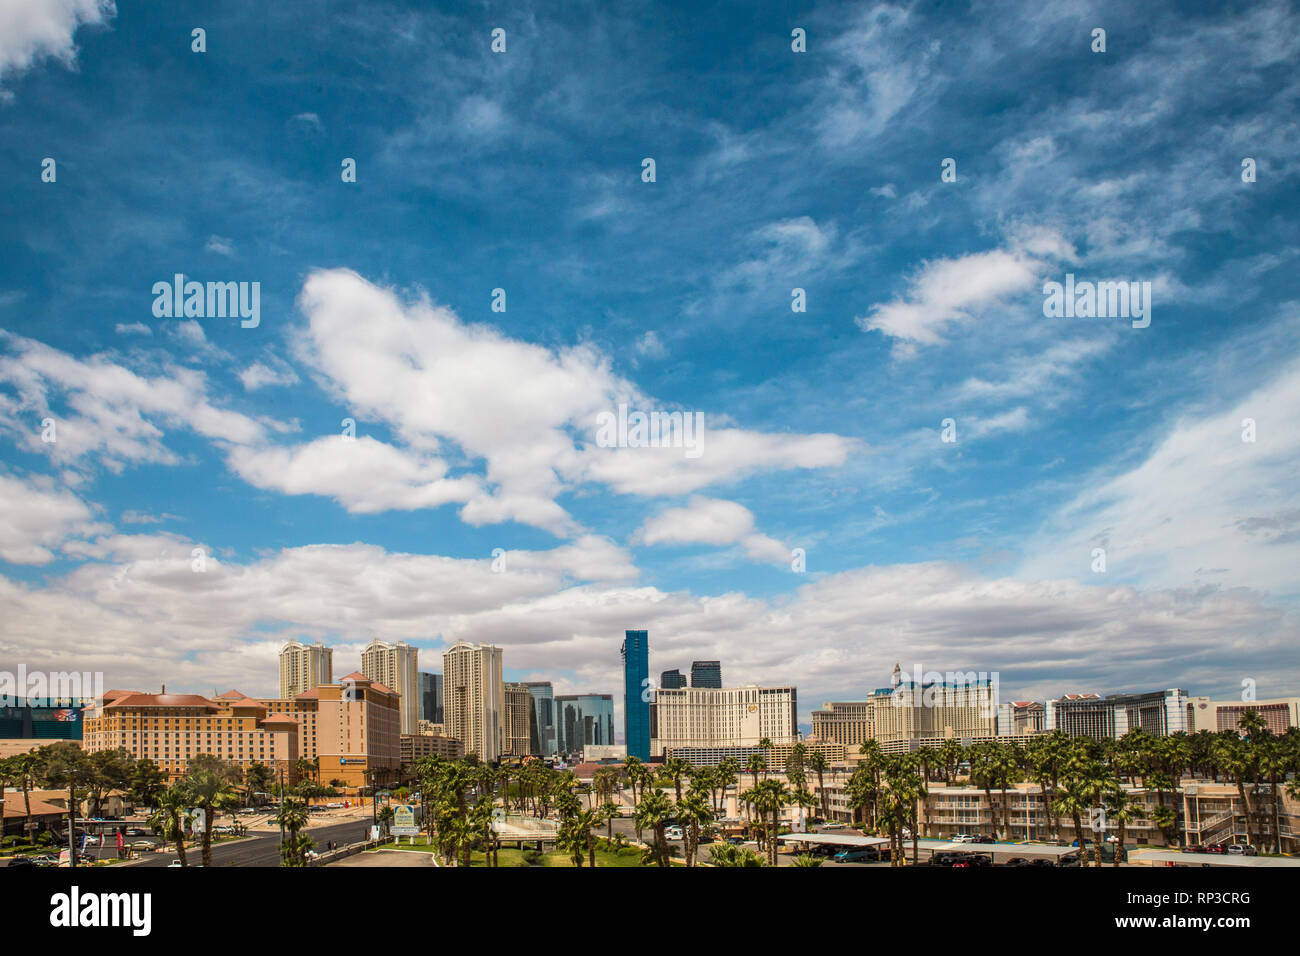 View across the city of Las Vegas Nevada with many hotel resort casinos in view Stock Photo